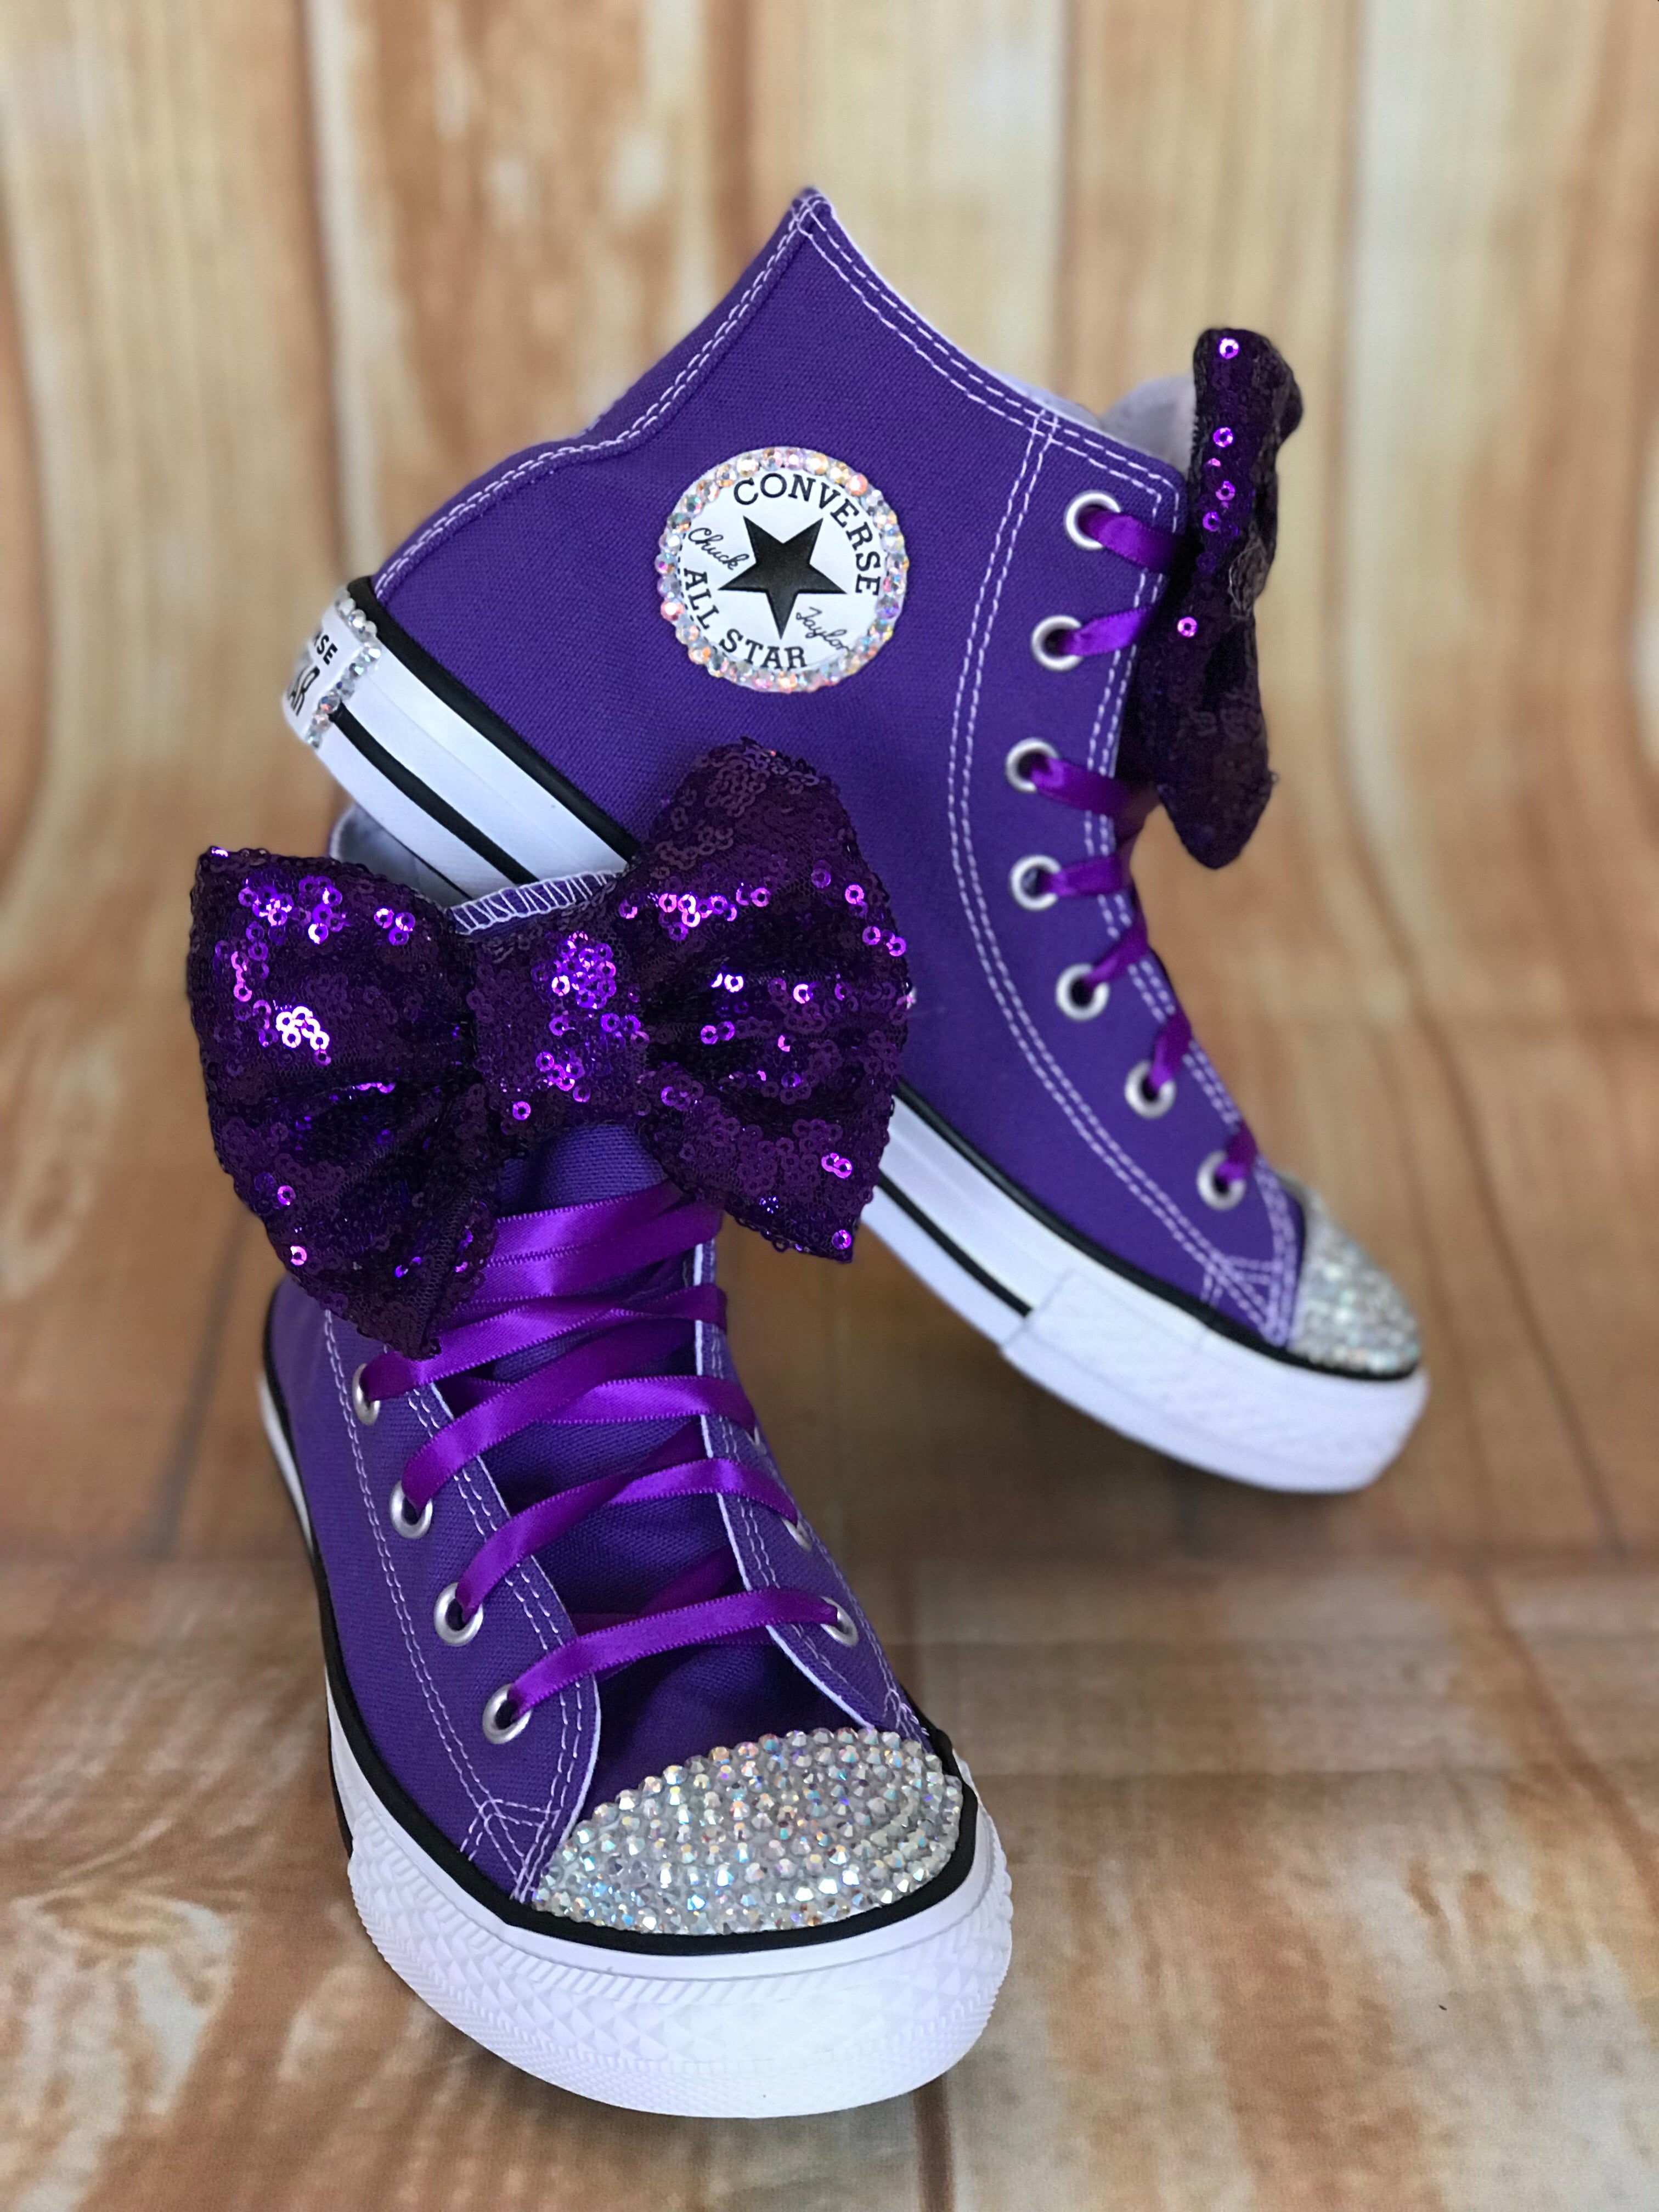 Purple Touch of Bling Sneakers, Little Kids Shoe 11-3 Ladybug Tutus